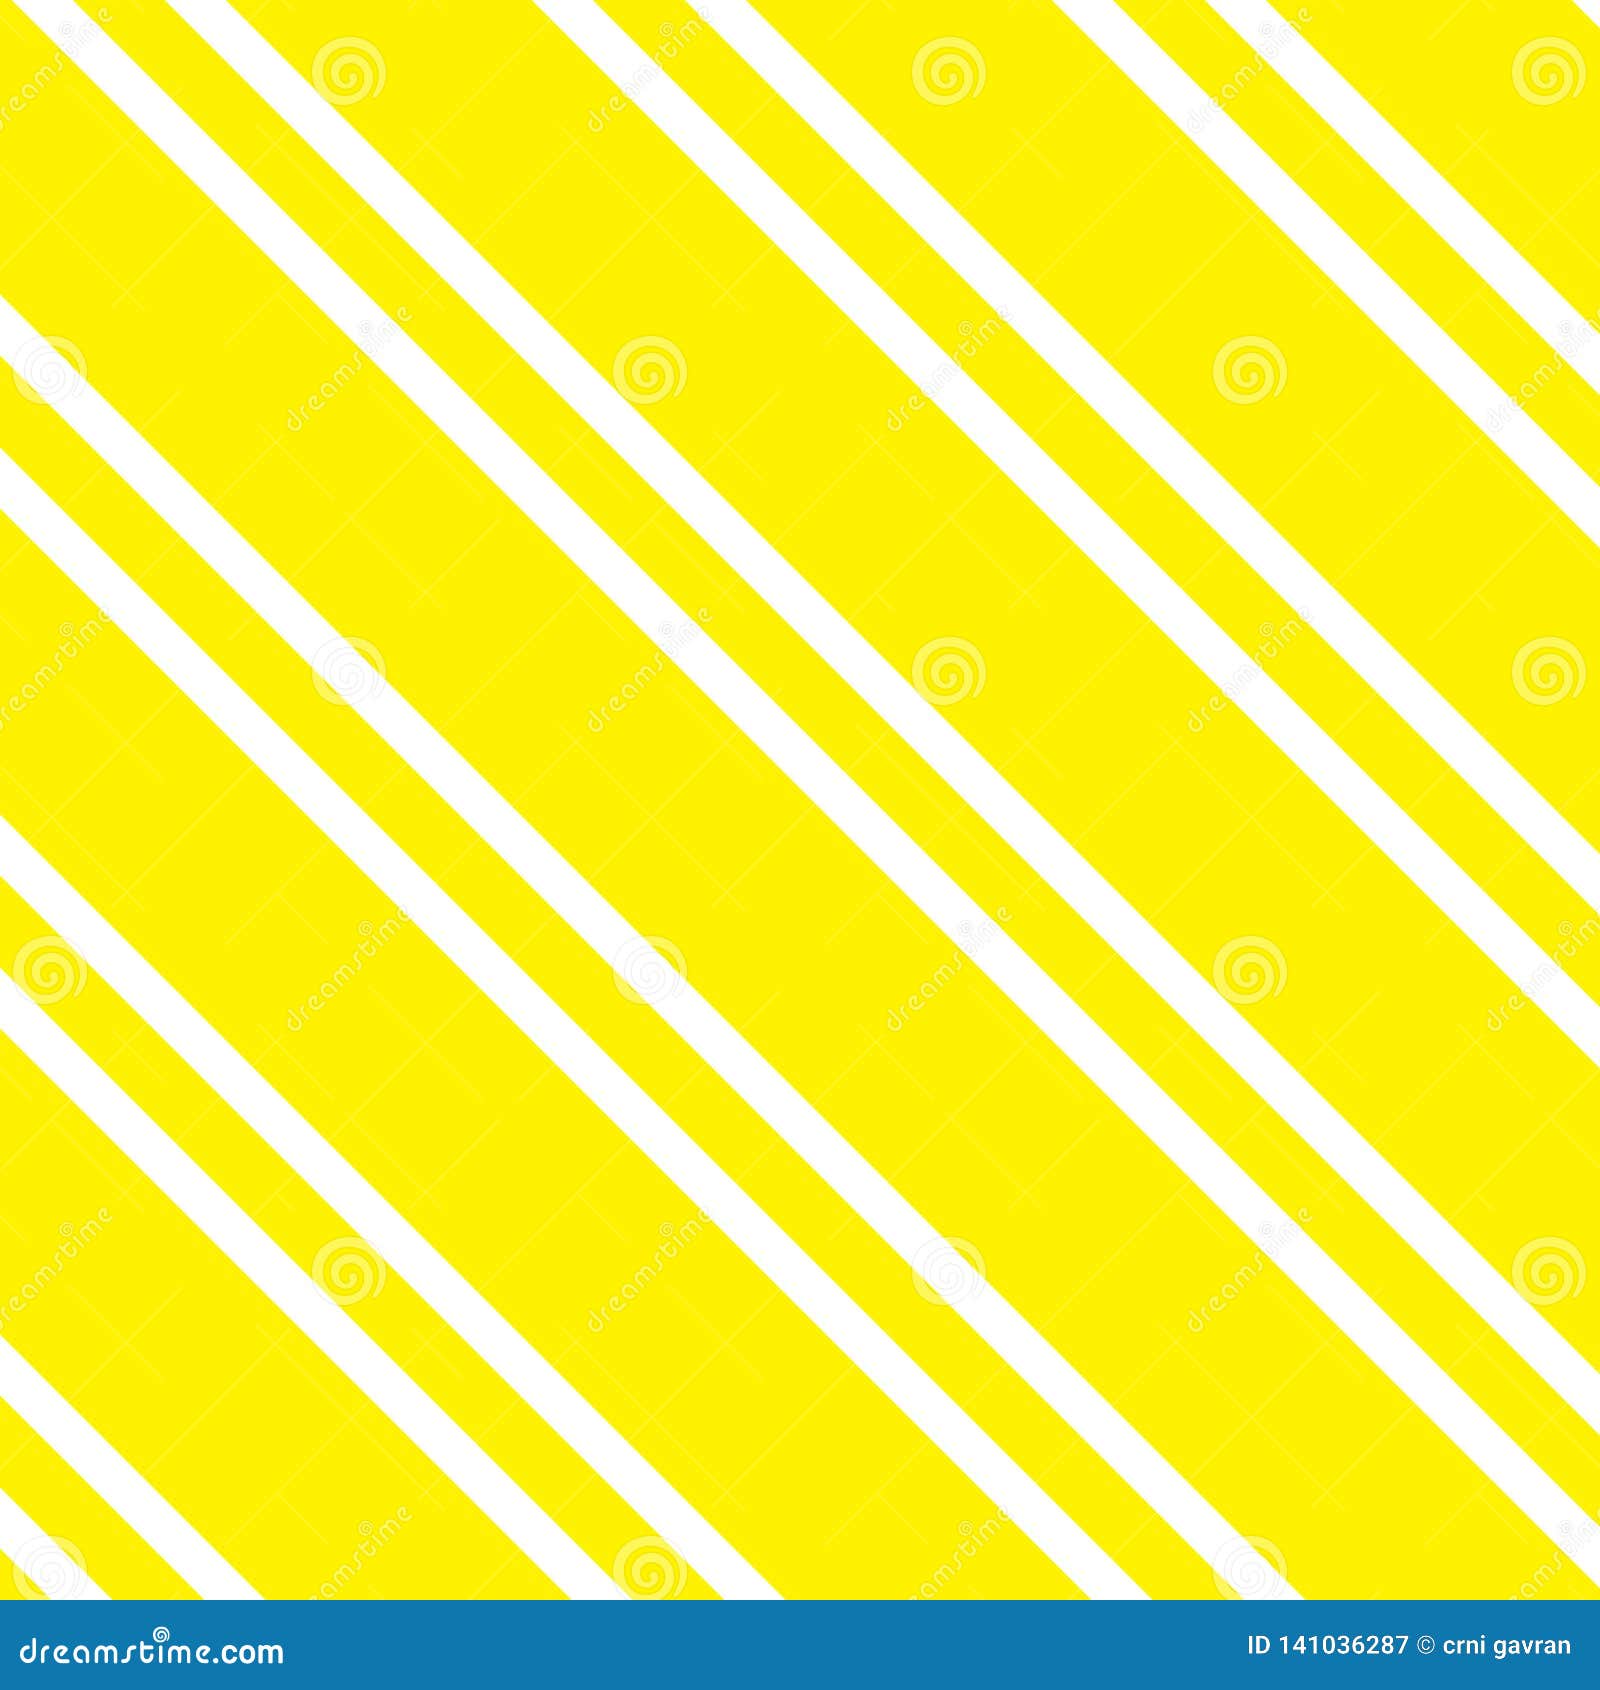 Illustration of Yellow and White Stripes, Used for Backgrounds.Vector ...